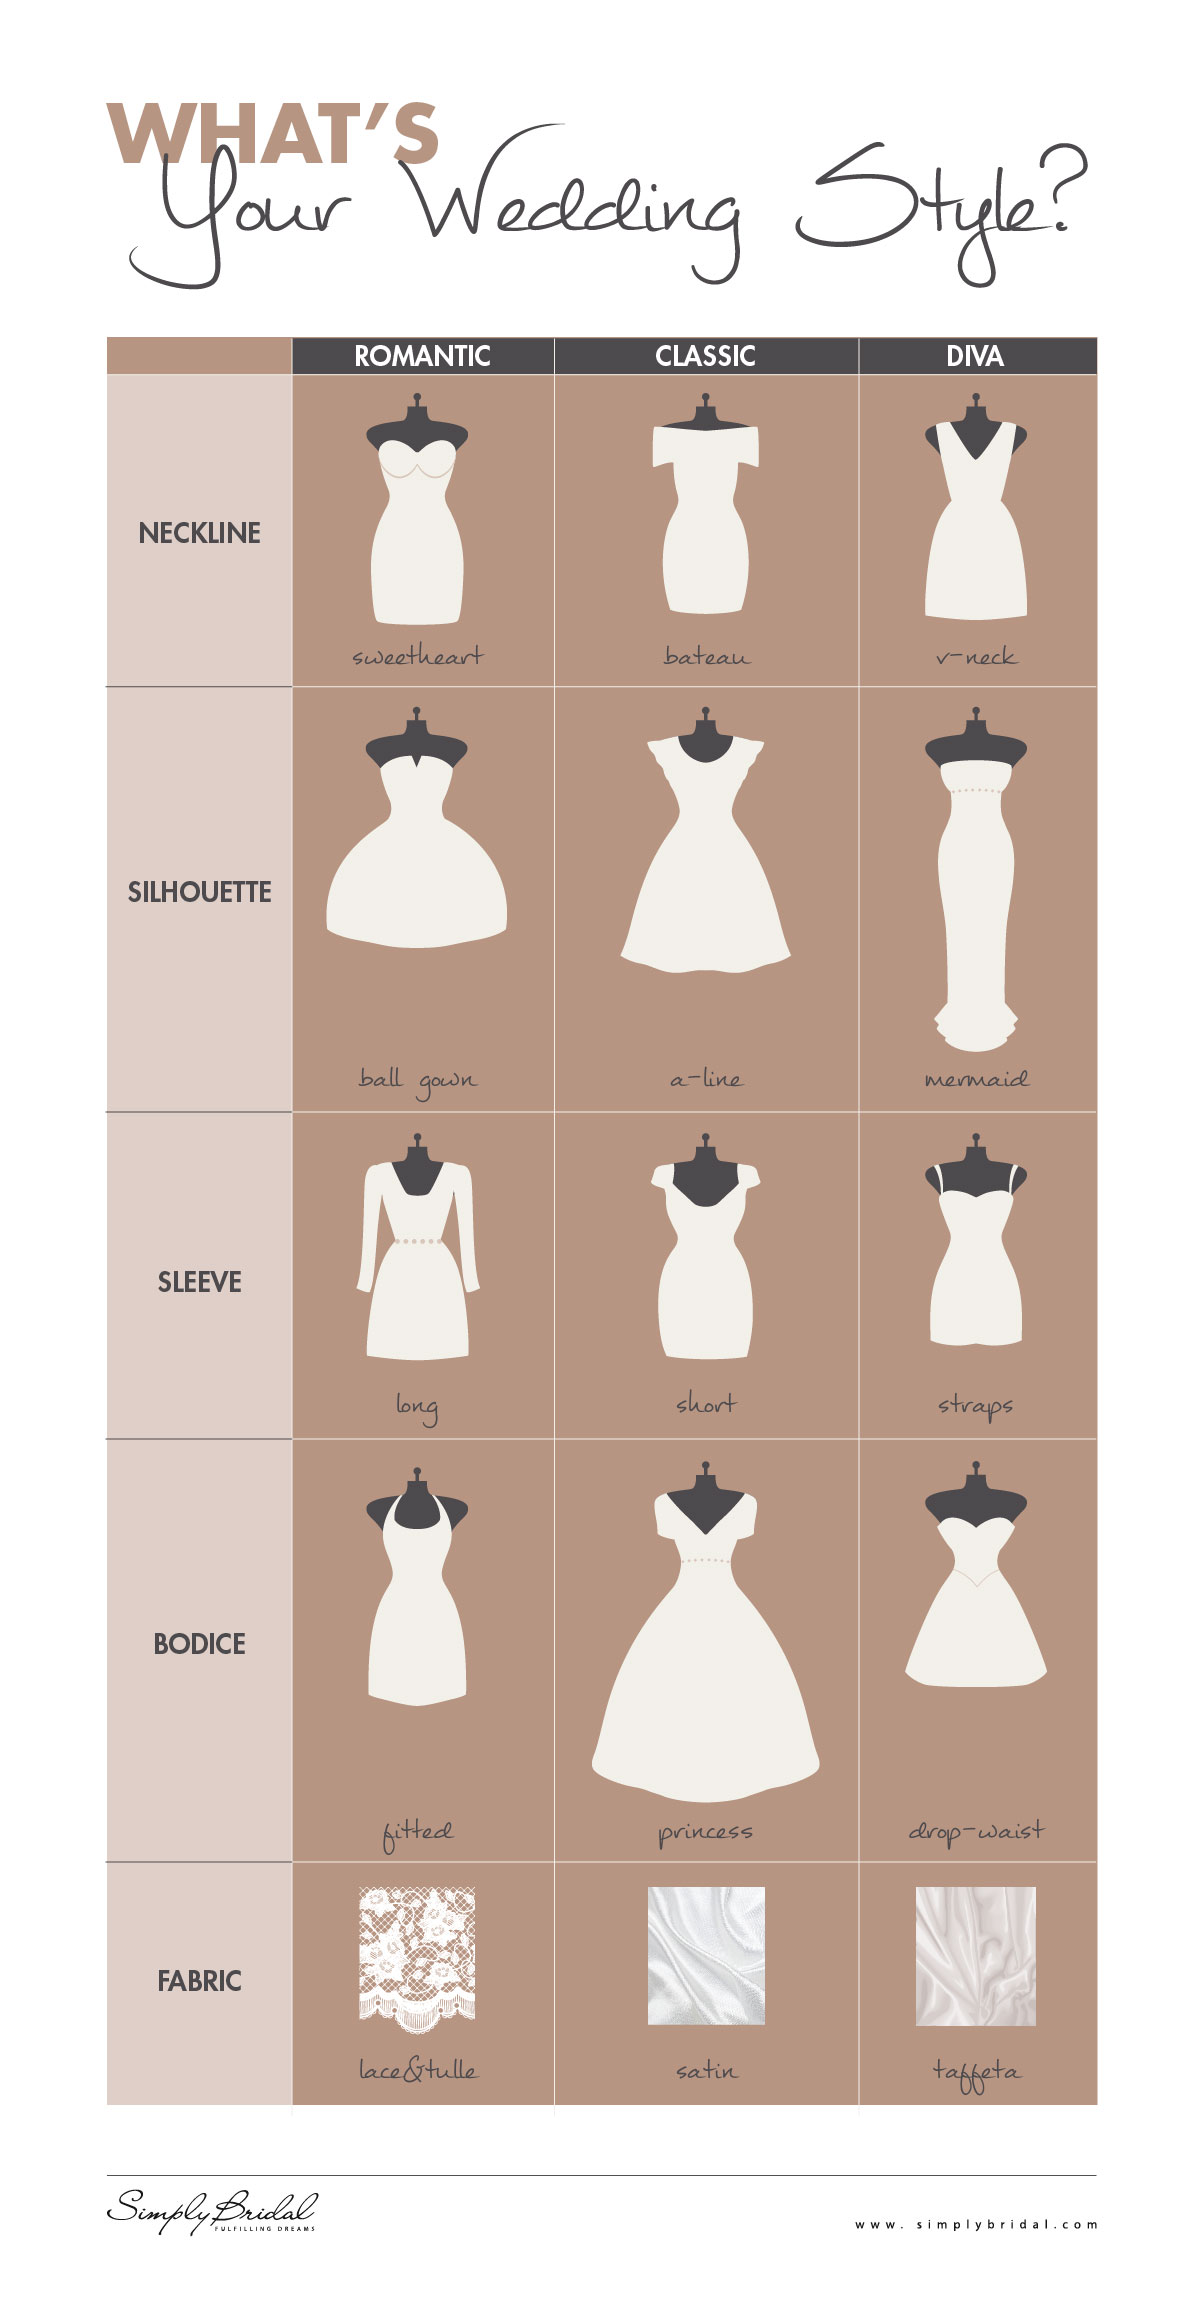 Wedding Dress Styles For Different Body Types | ShilpaAhuja.com